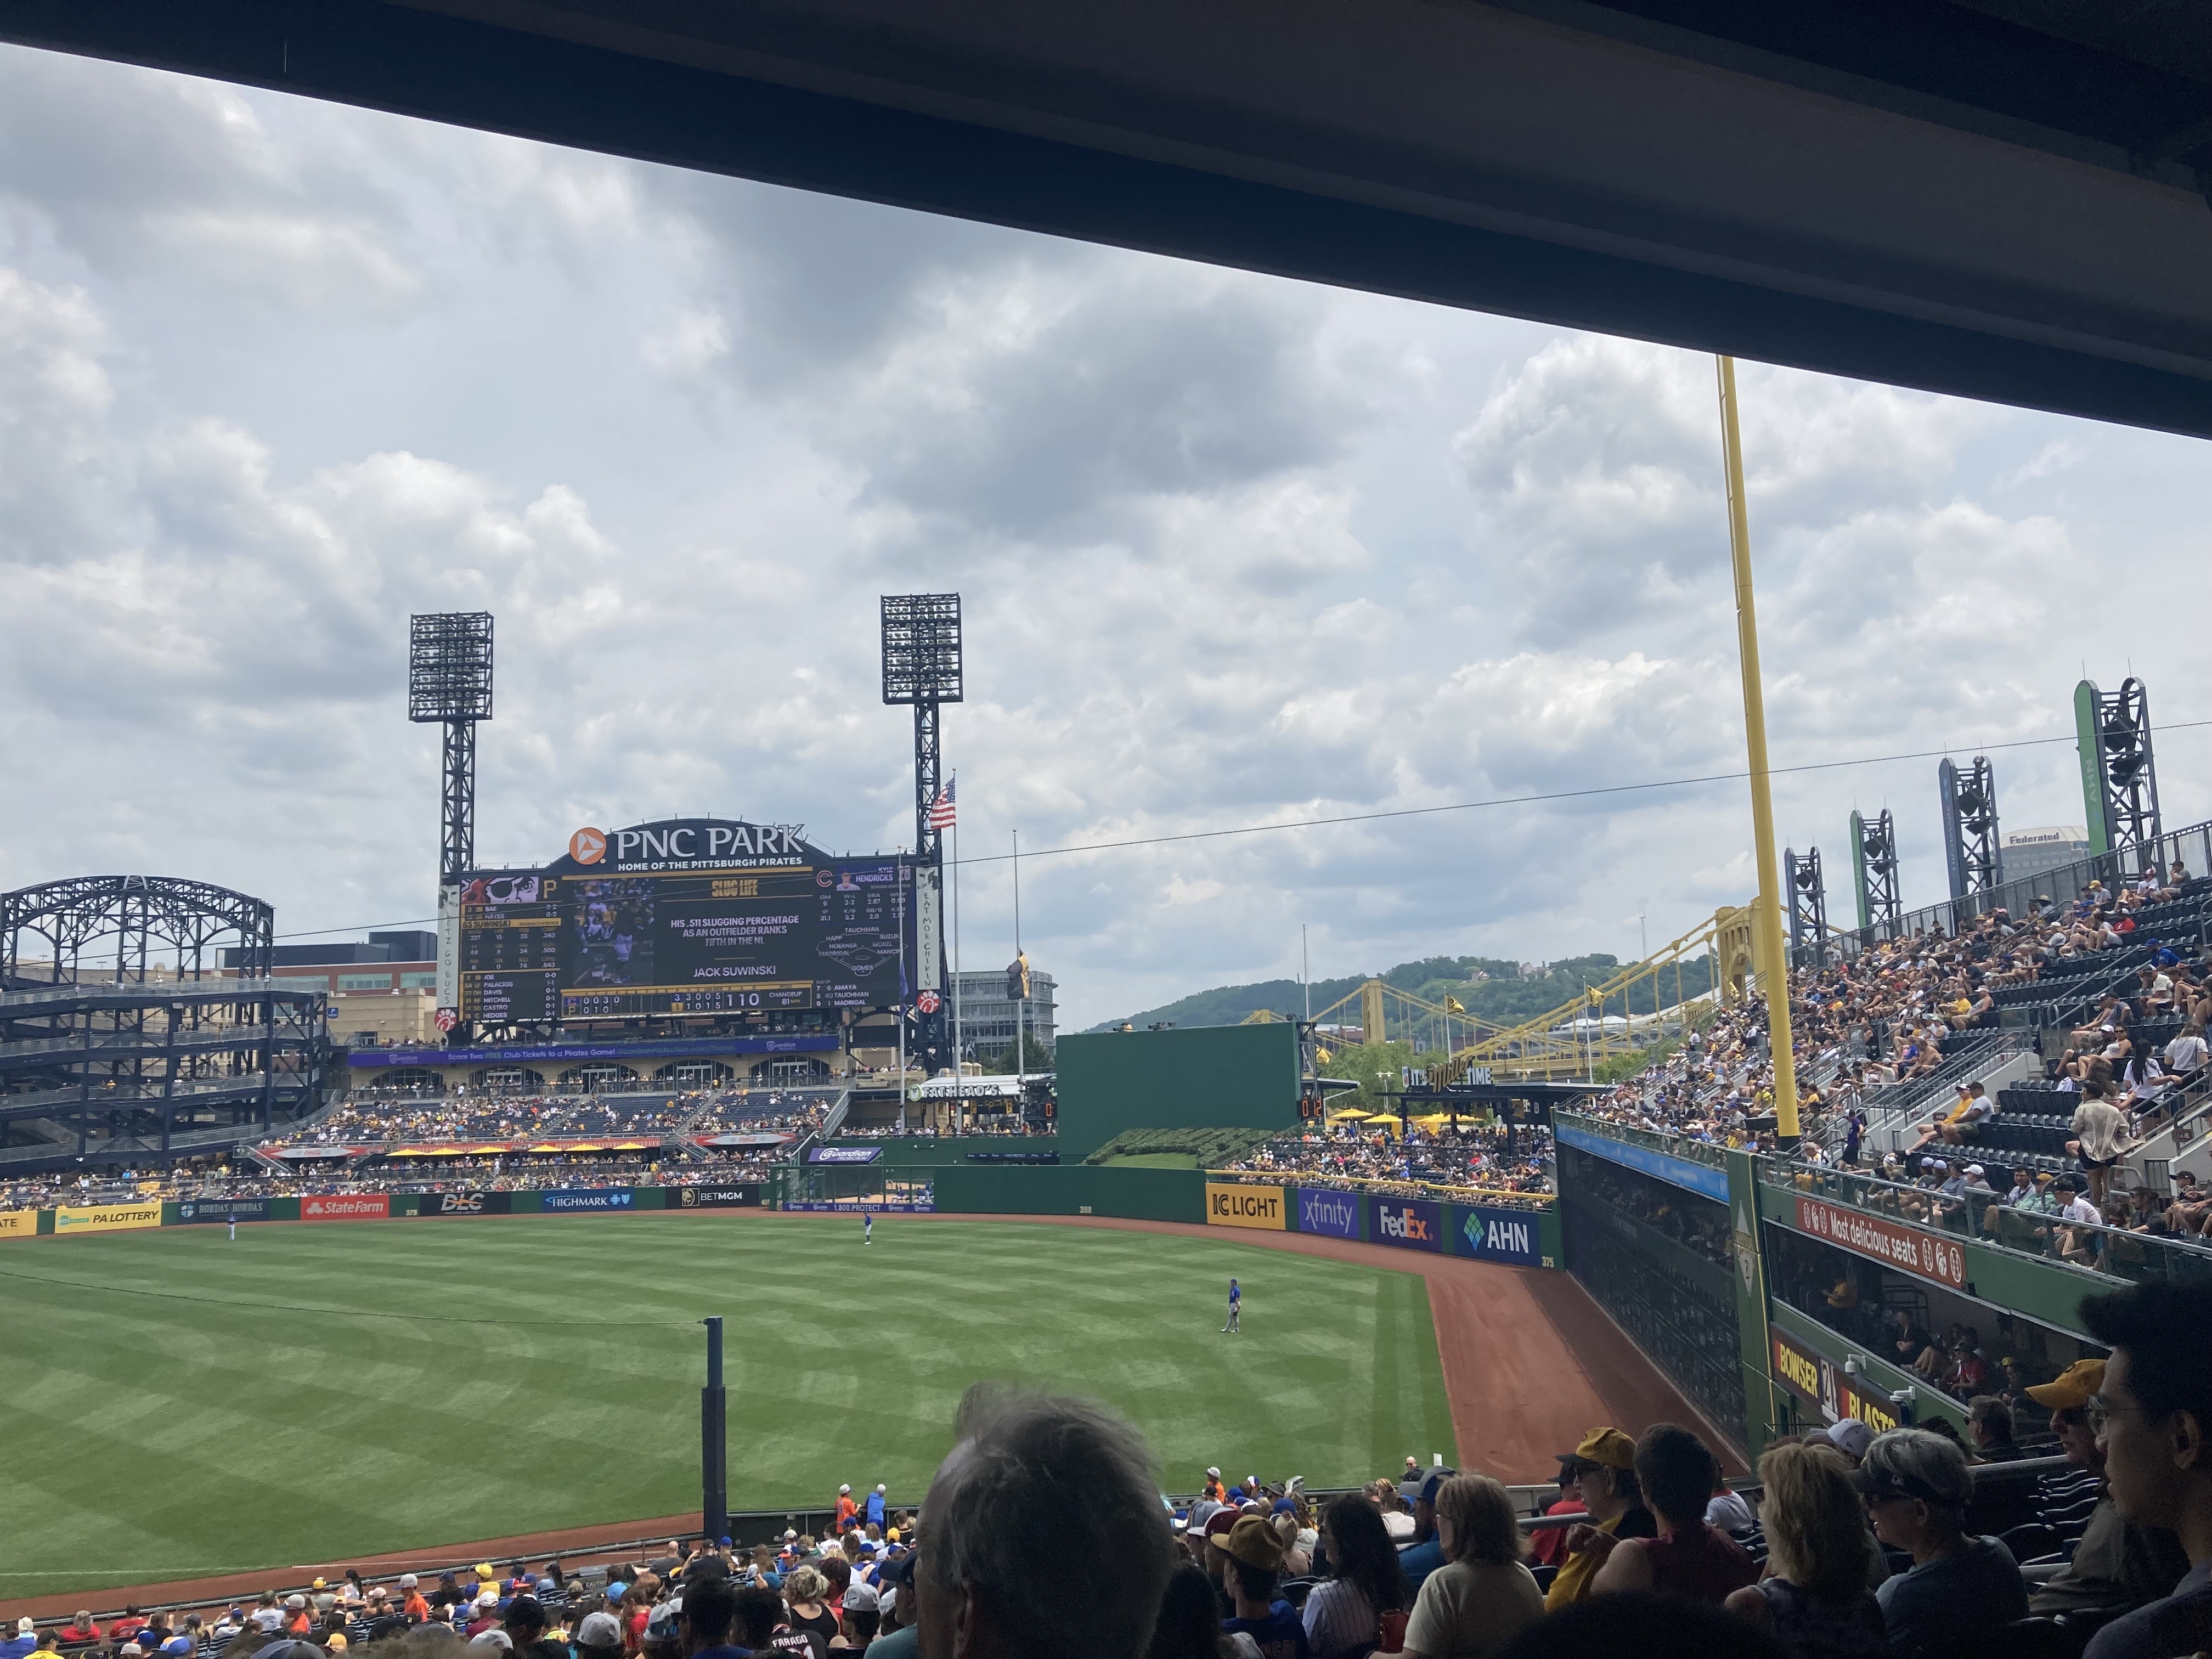 view of the scoreboard at PNC Park during the student outing